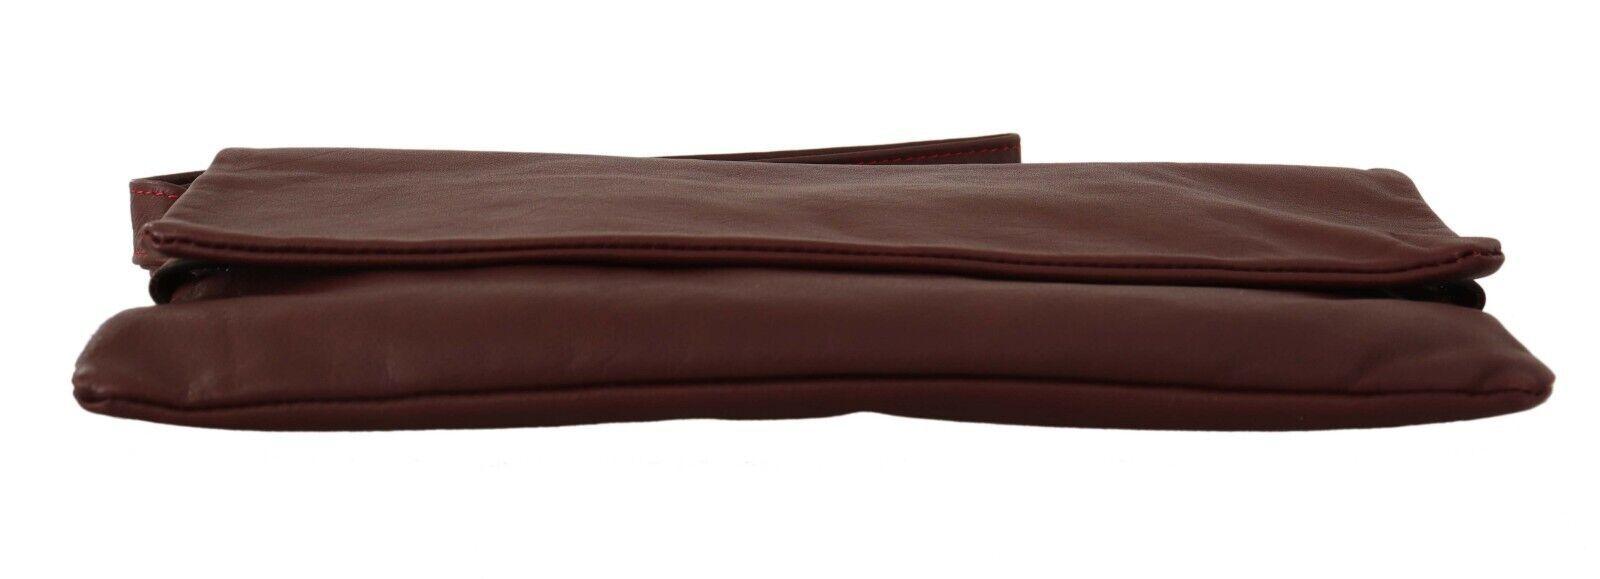 Elegant Brown Leather Clutch with Silver Detailing - PER.FASHION